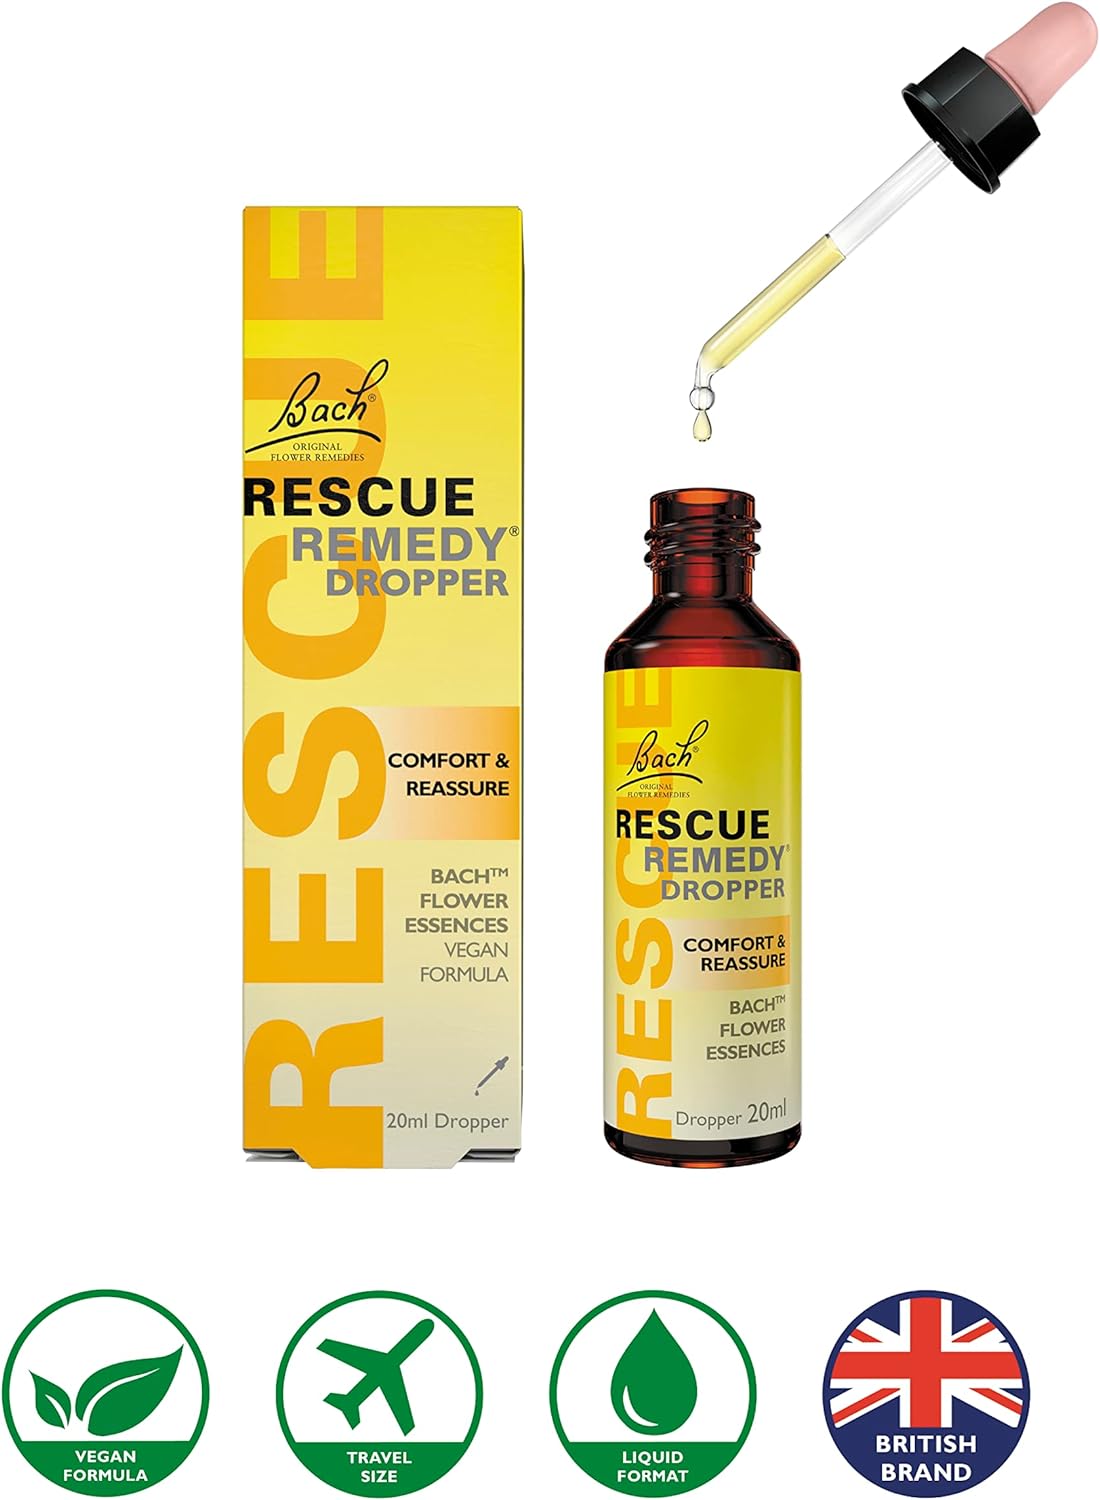 RESCUE REMEDY Dropper, 20mL‚ Natural Homeopathic Stress Relief : Everything Else